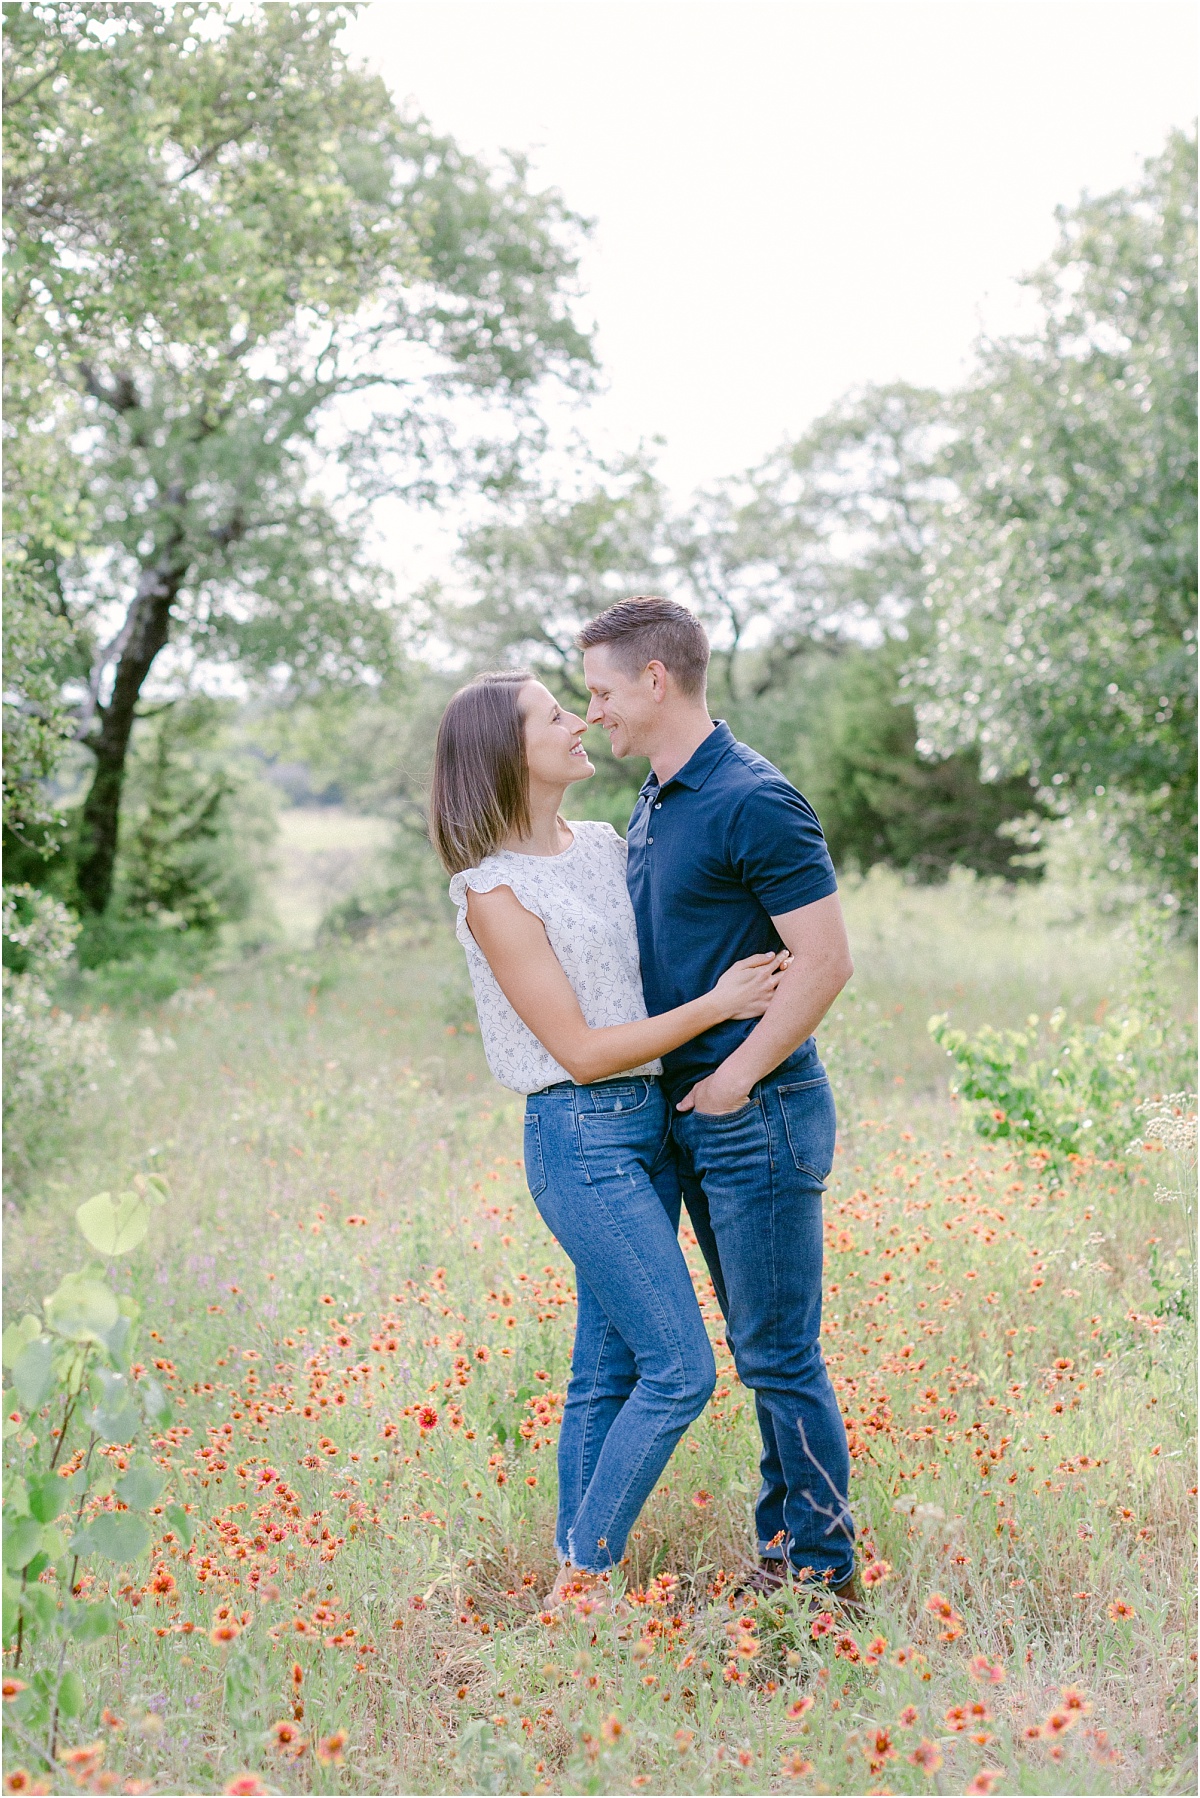 Springtime family photography in the Texas wildflowers.